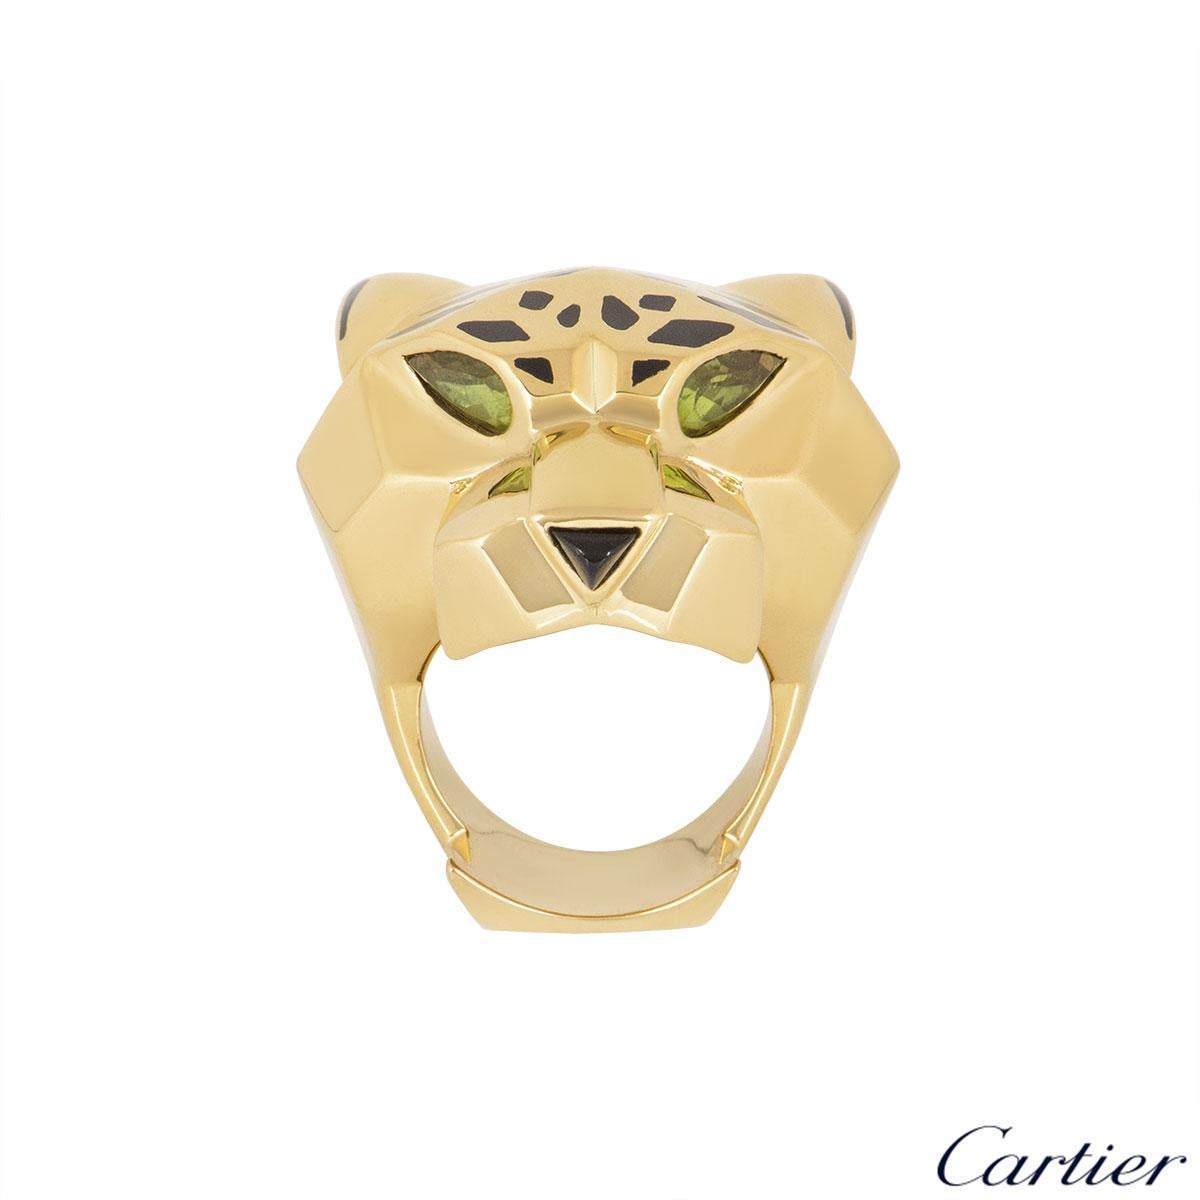 A beautiful 18k yellow gold ring by Cartier from the Panthere De Cartier collection. The ring is composed of a panthere head motif set with bold lacquer spots and is complemented with two peridots set as the eyes with an onyx nose. The ring is a